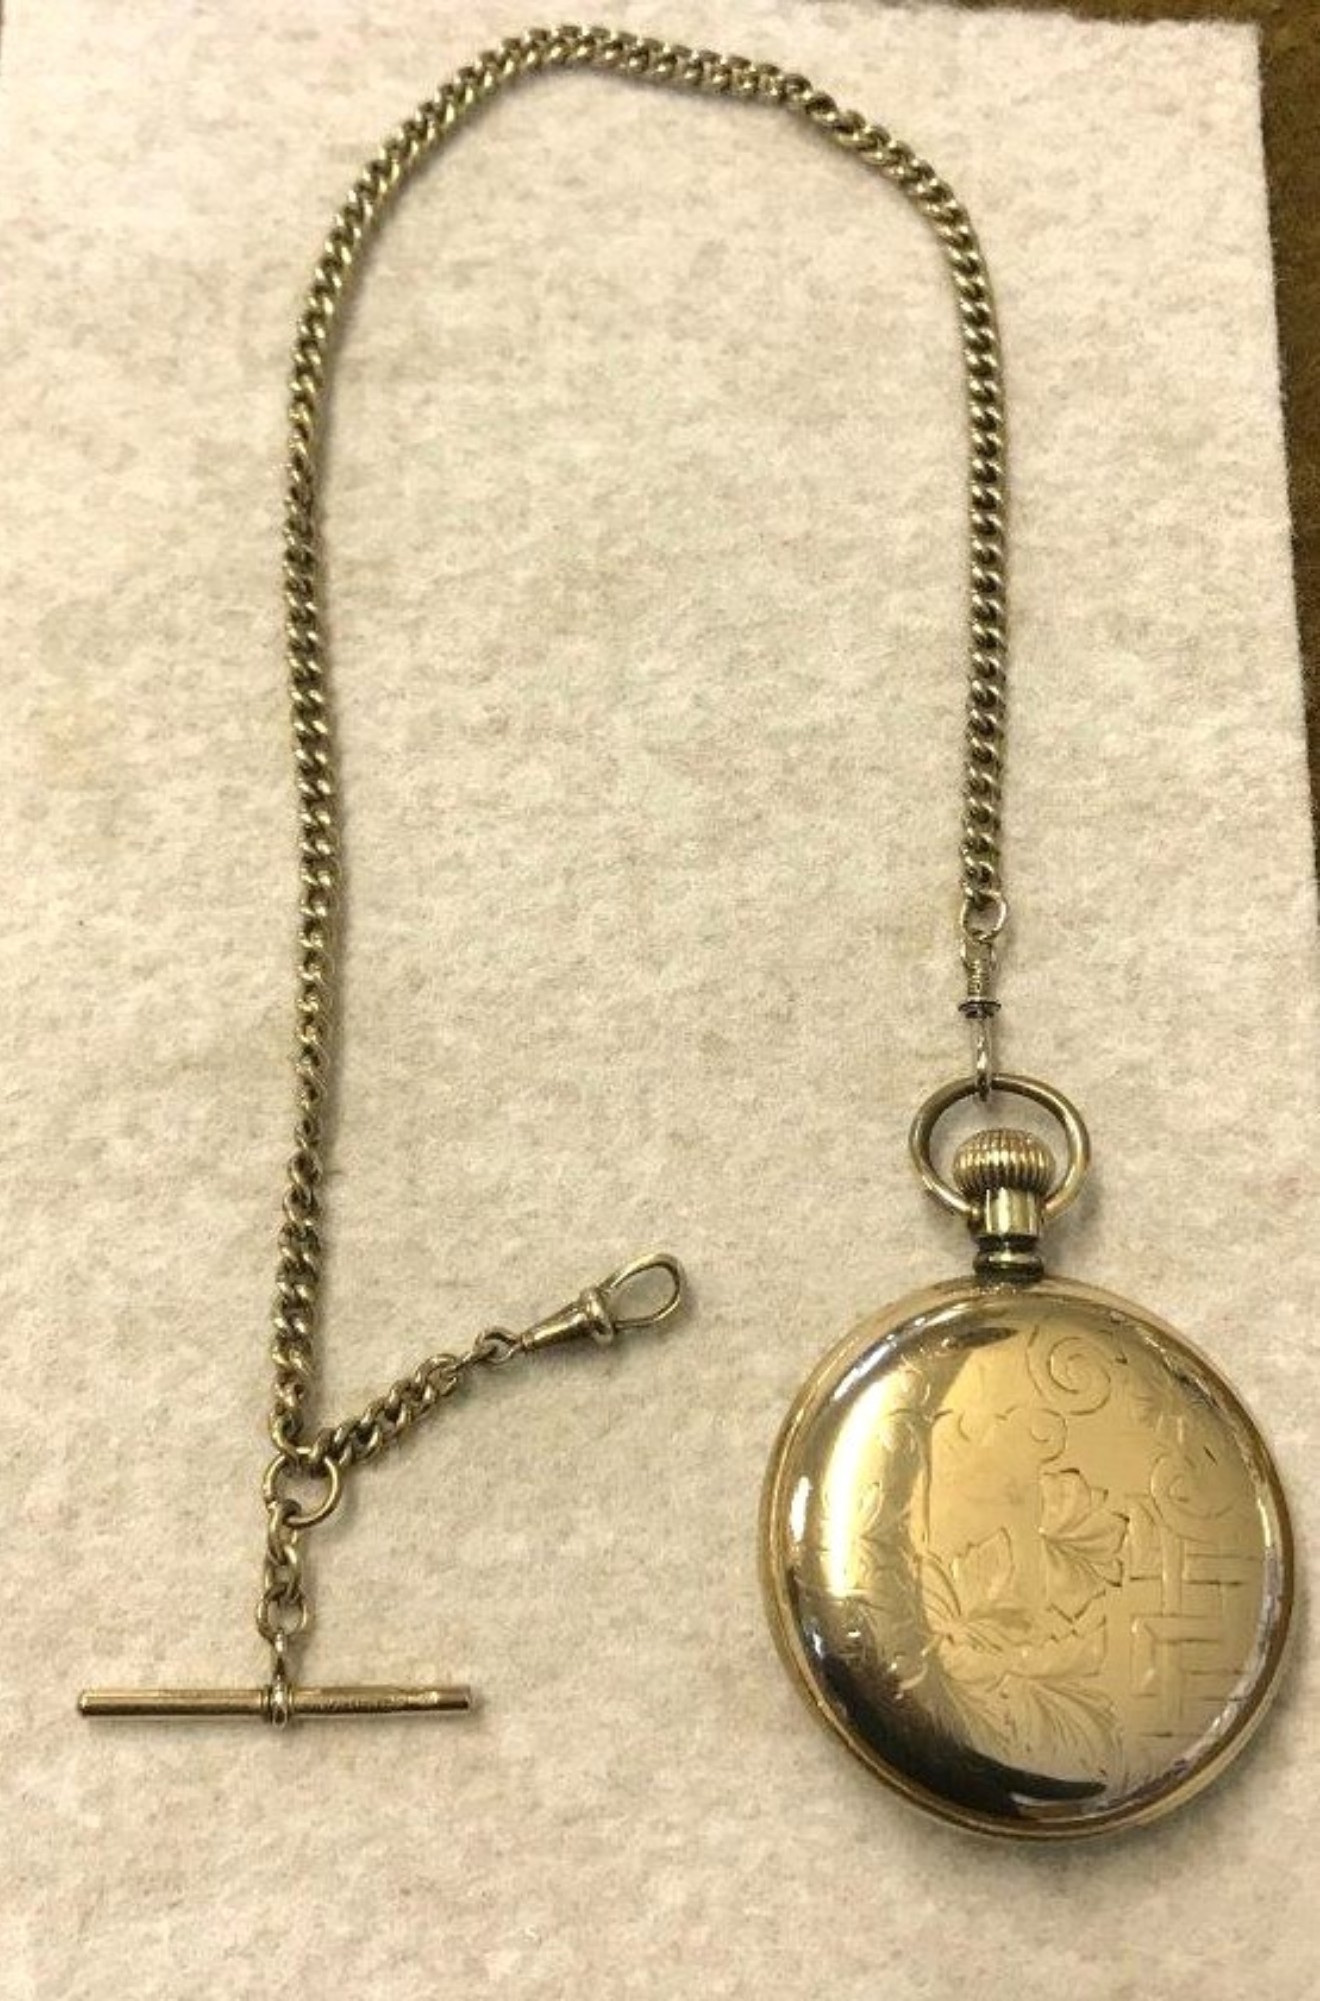 Antique Gold Plated Waltham Open Face Pocket Watch 15 Jewels 24 Hour Dial